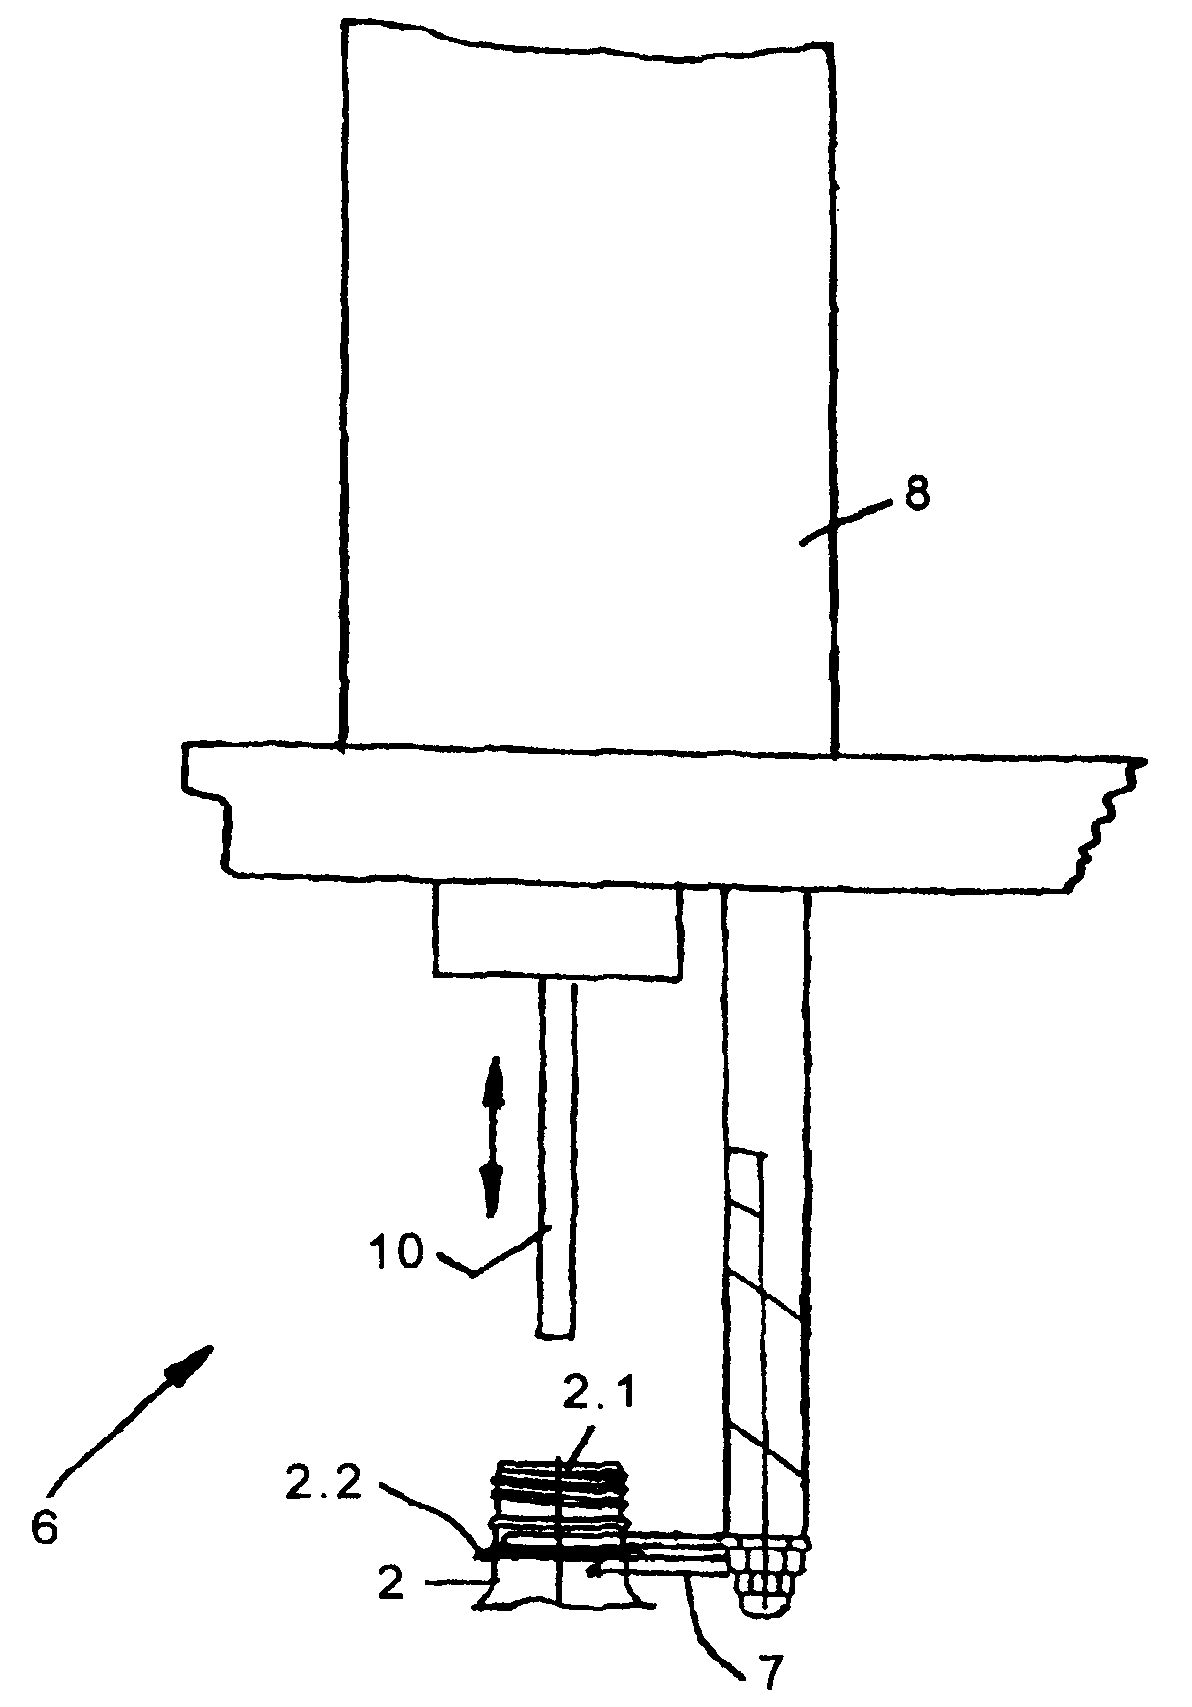 Beverage bottling plant with method and apparatus for cleaning, filling, and closing bottles